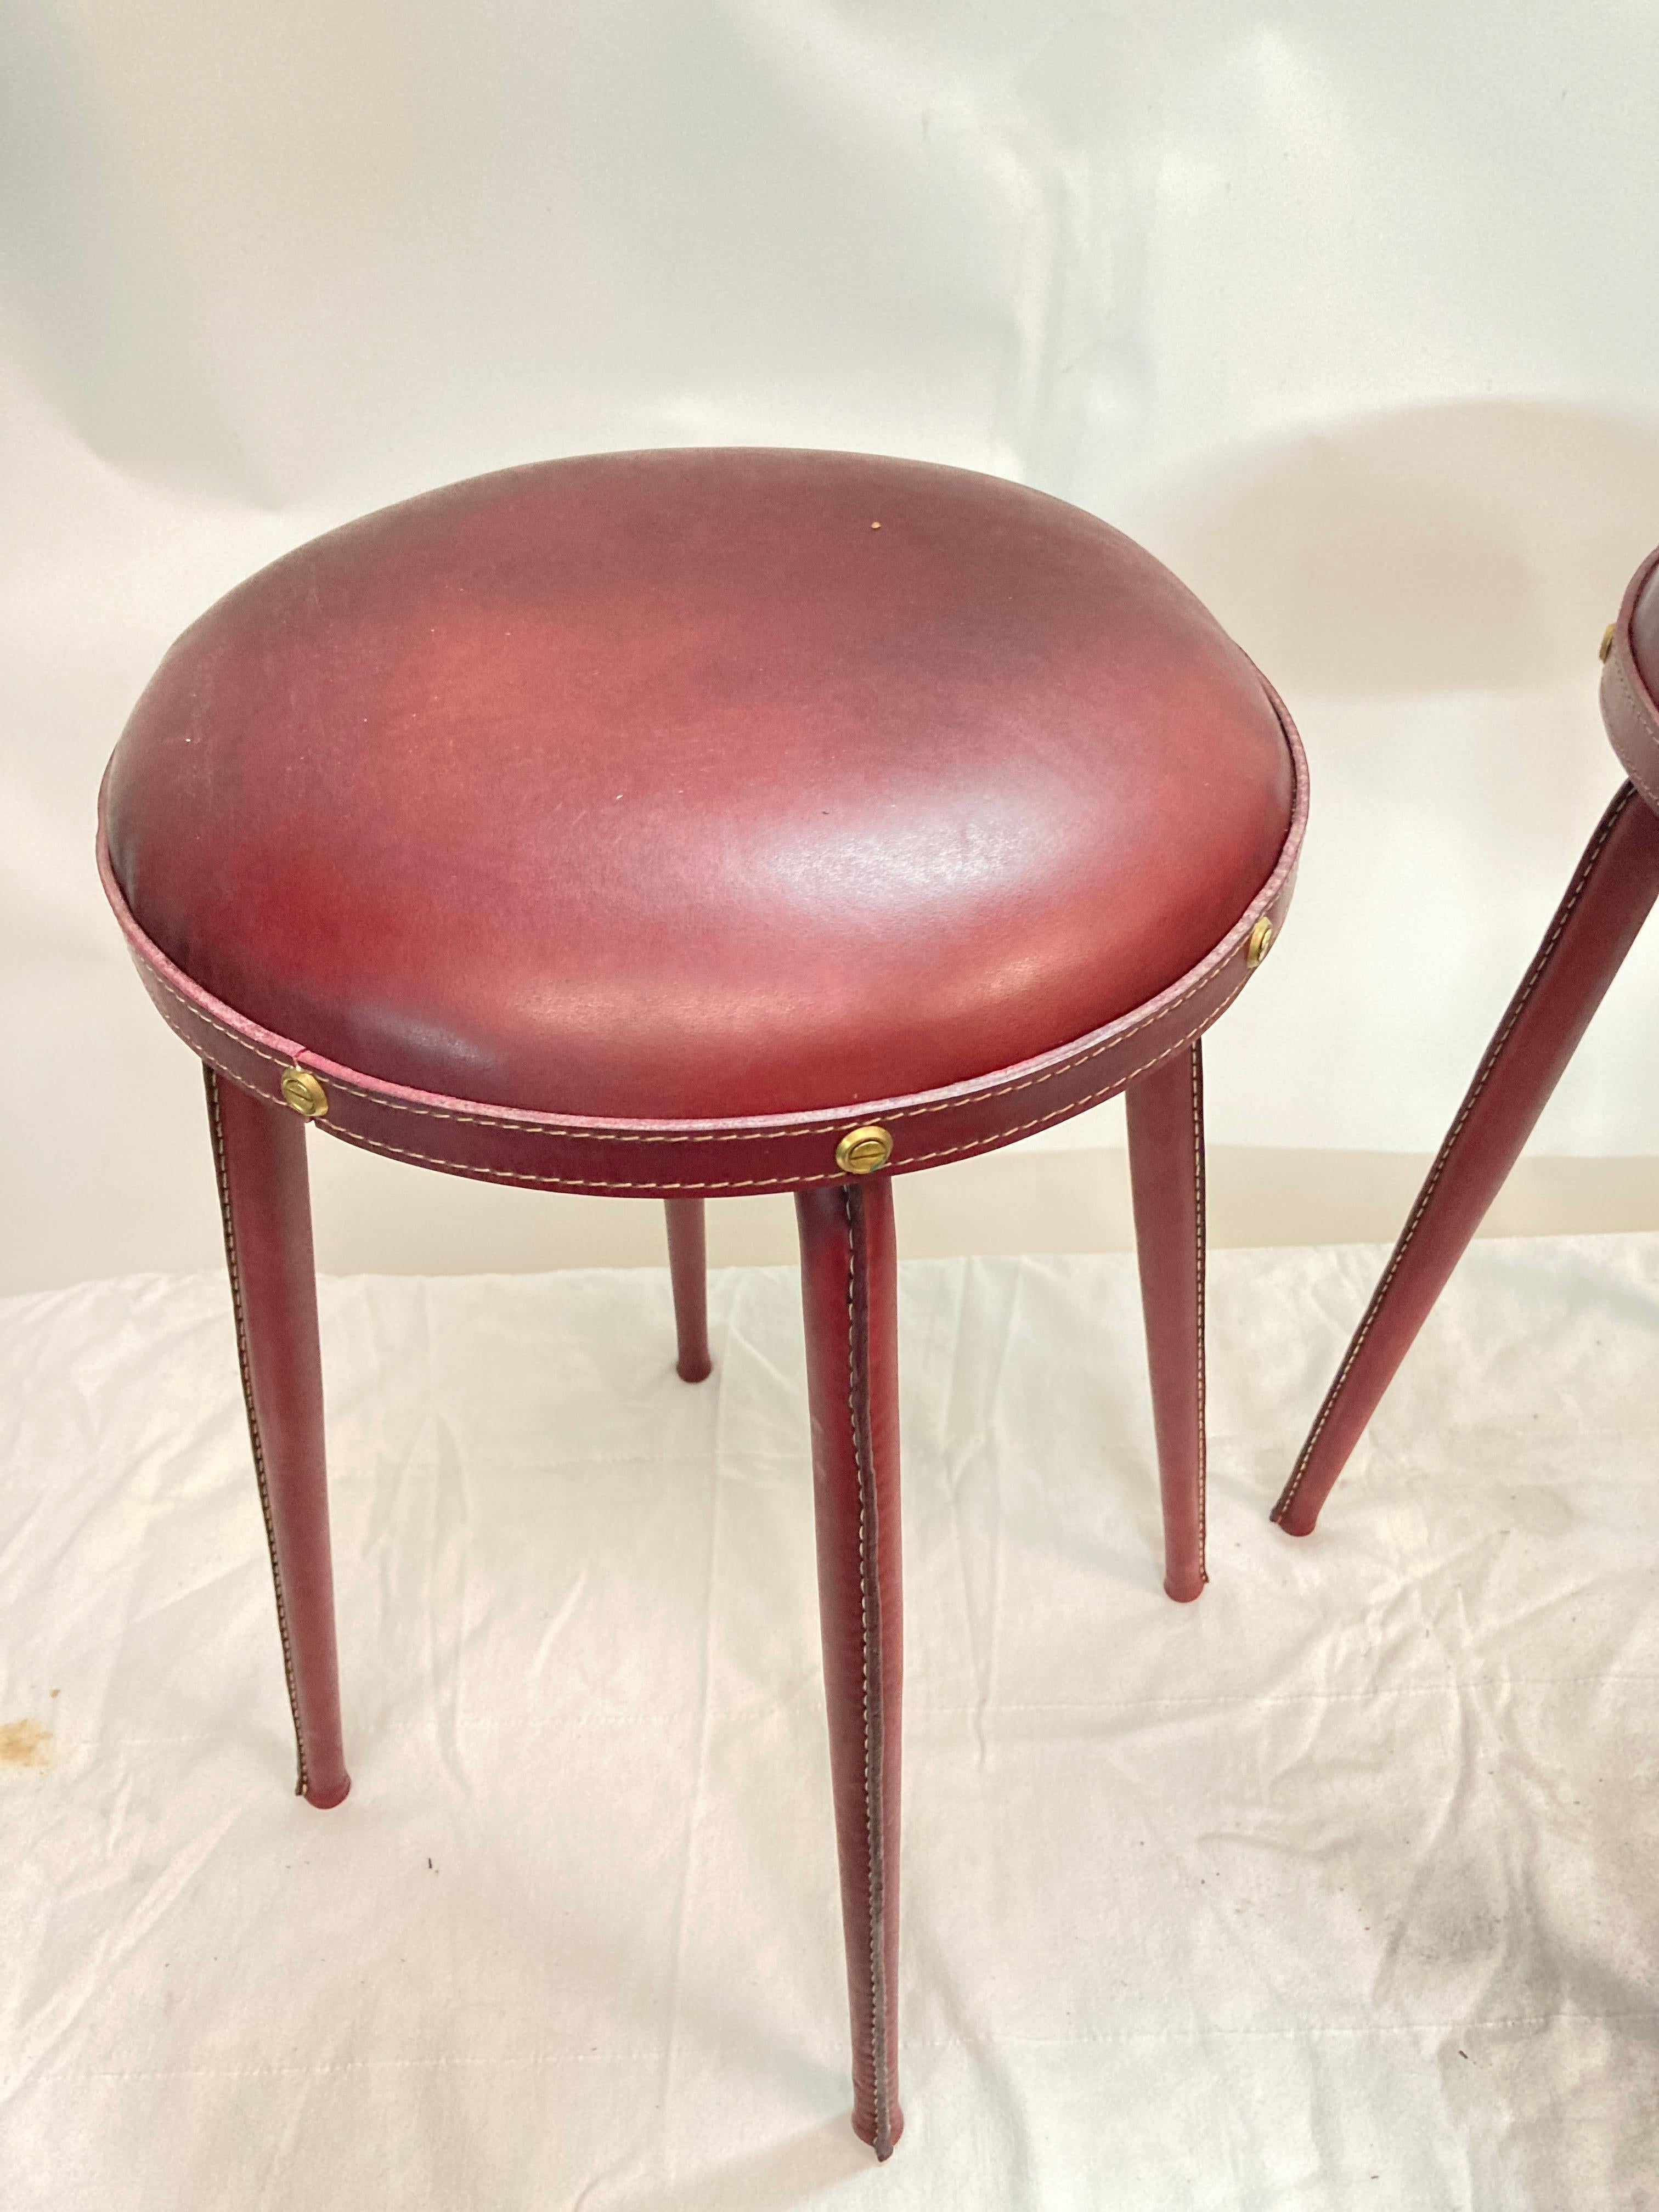 Nice pair of stitched leather  stools 
Burgundy
Jacques Adnet
France
1950's